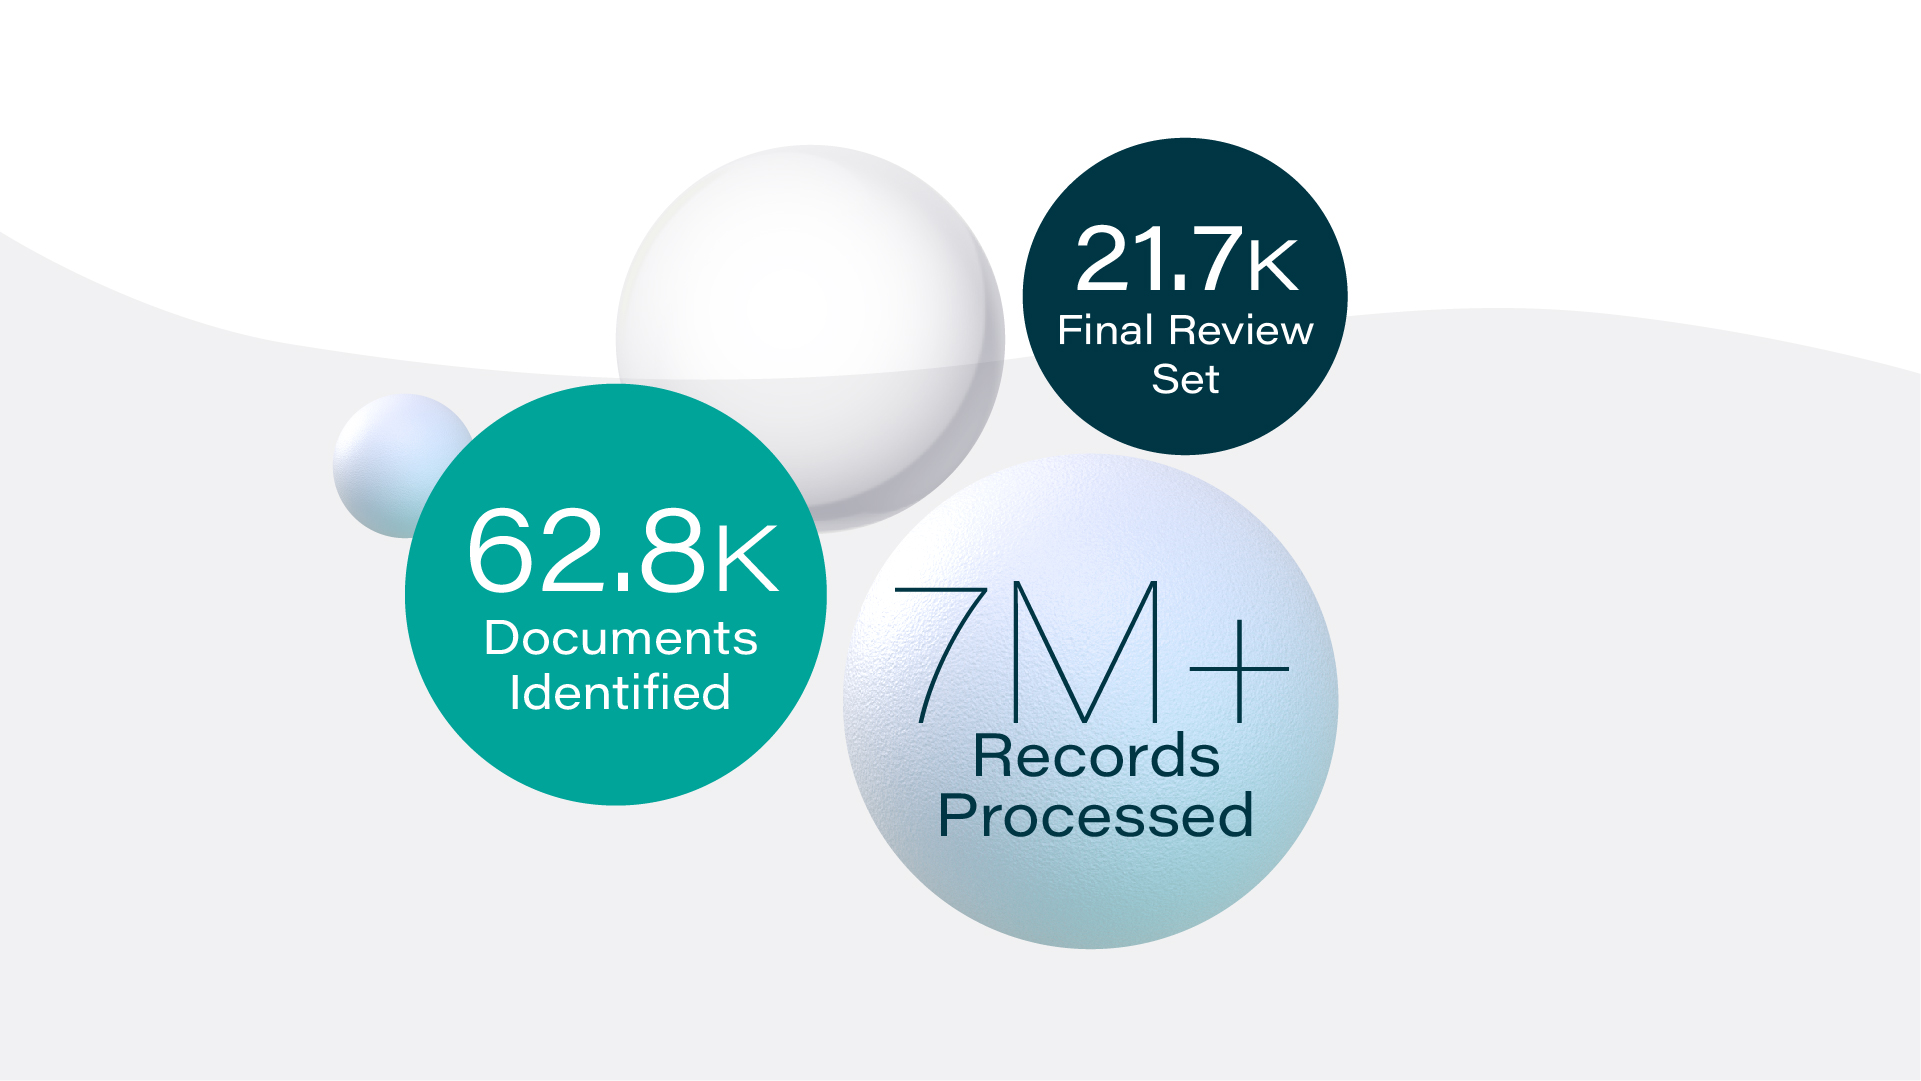 Managed eDiscovery slide on records processed and documents identified